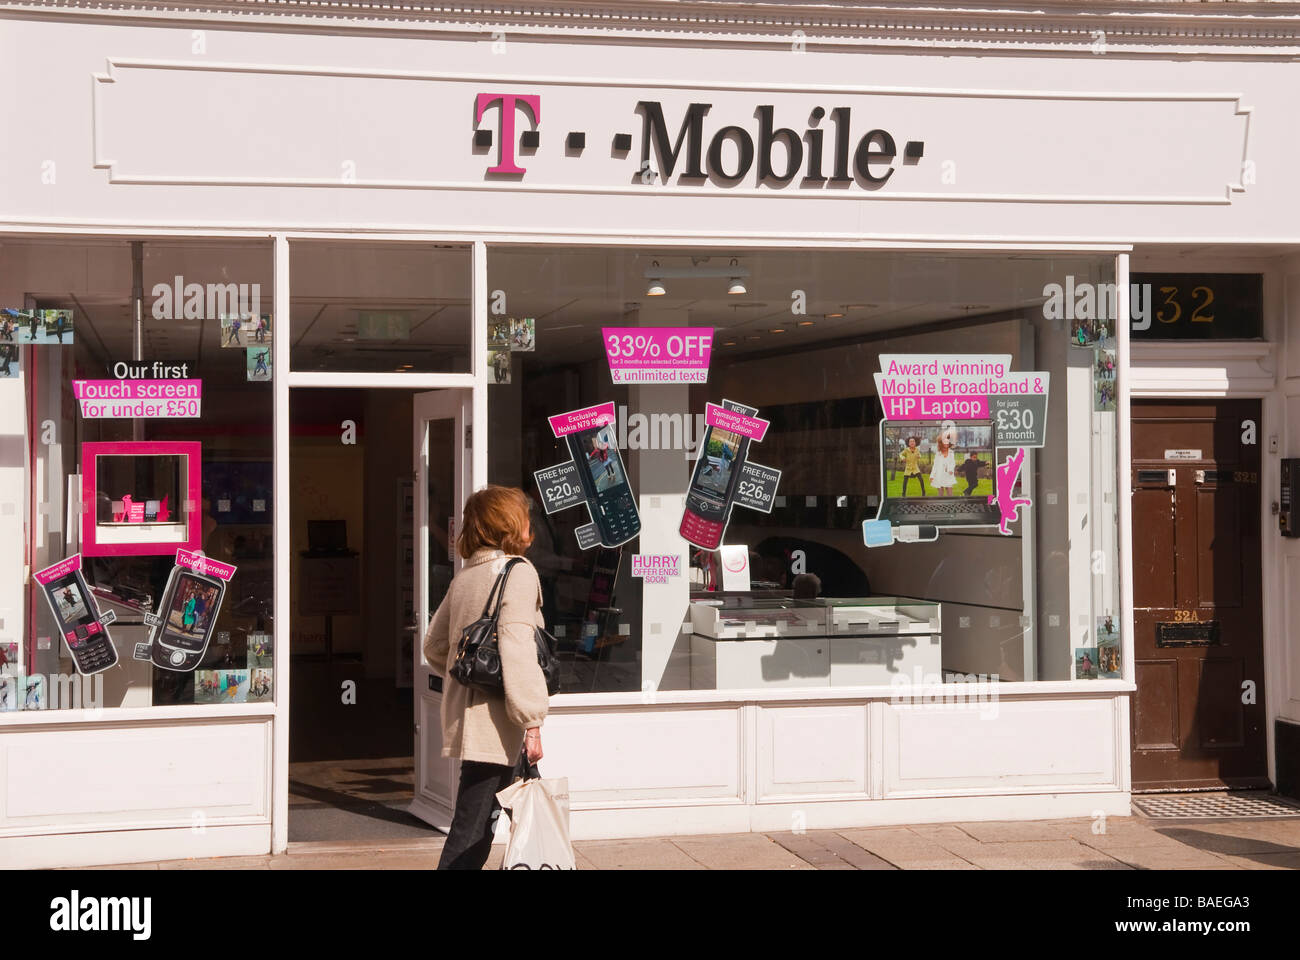 T Mobile phone shop store in York,Yorkshire,Uk selling mobile phones Stock Photo